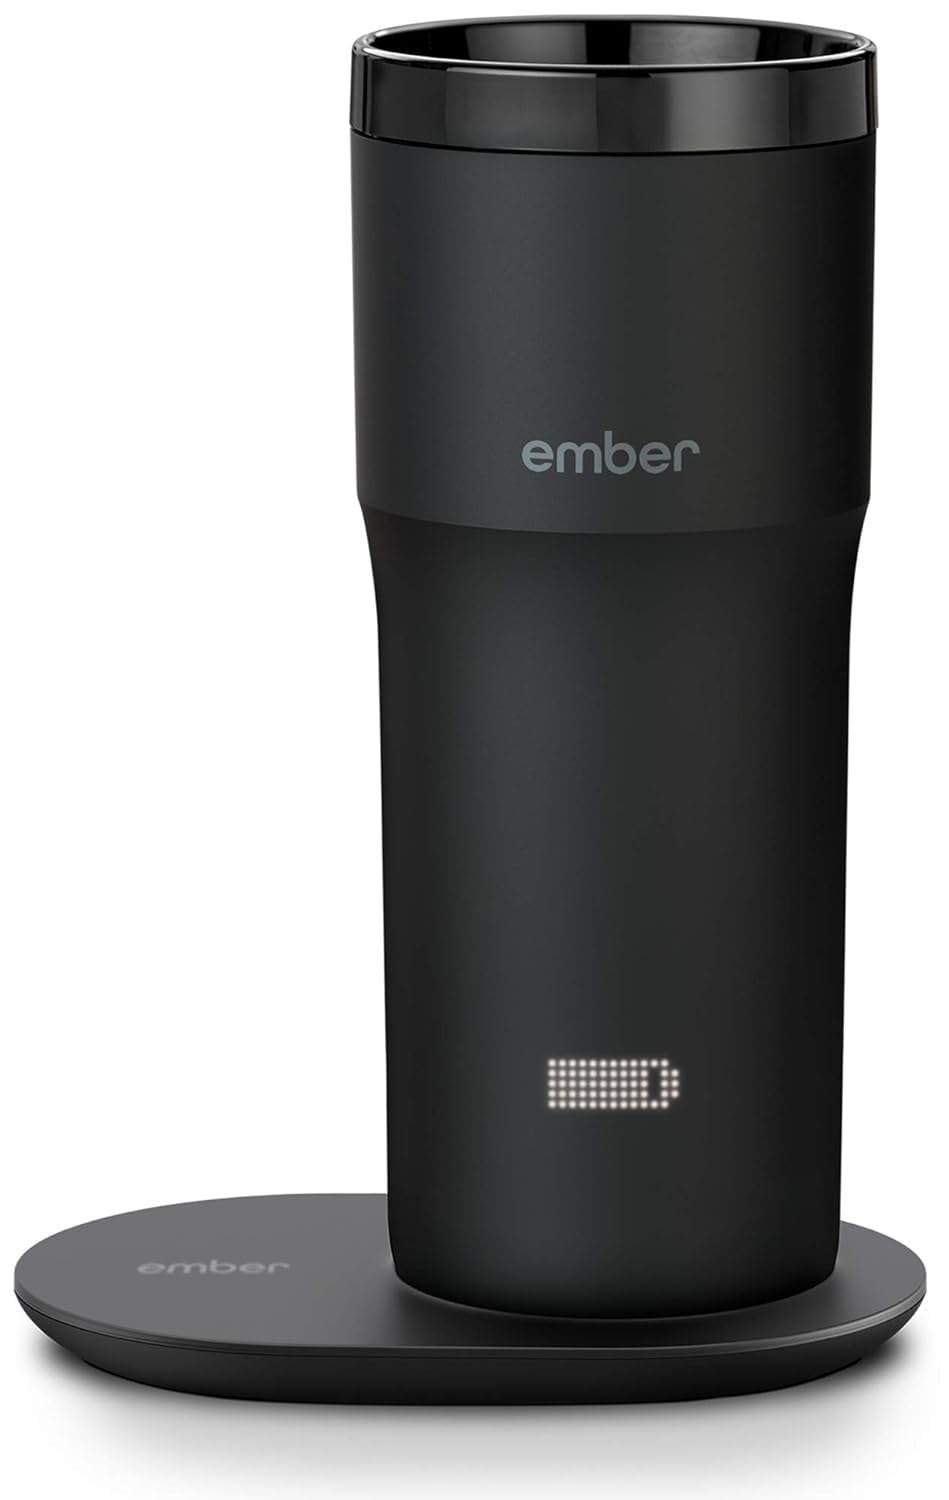 Ember Temperature Control Travel Mug 2, 12 oz, Black, 3-hr Battery Life - App Controlled Heated Coffee Travel Mug - Improved Design (Stainless Steel)